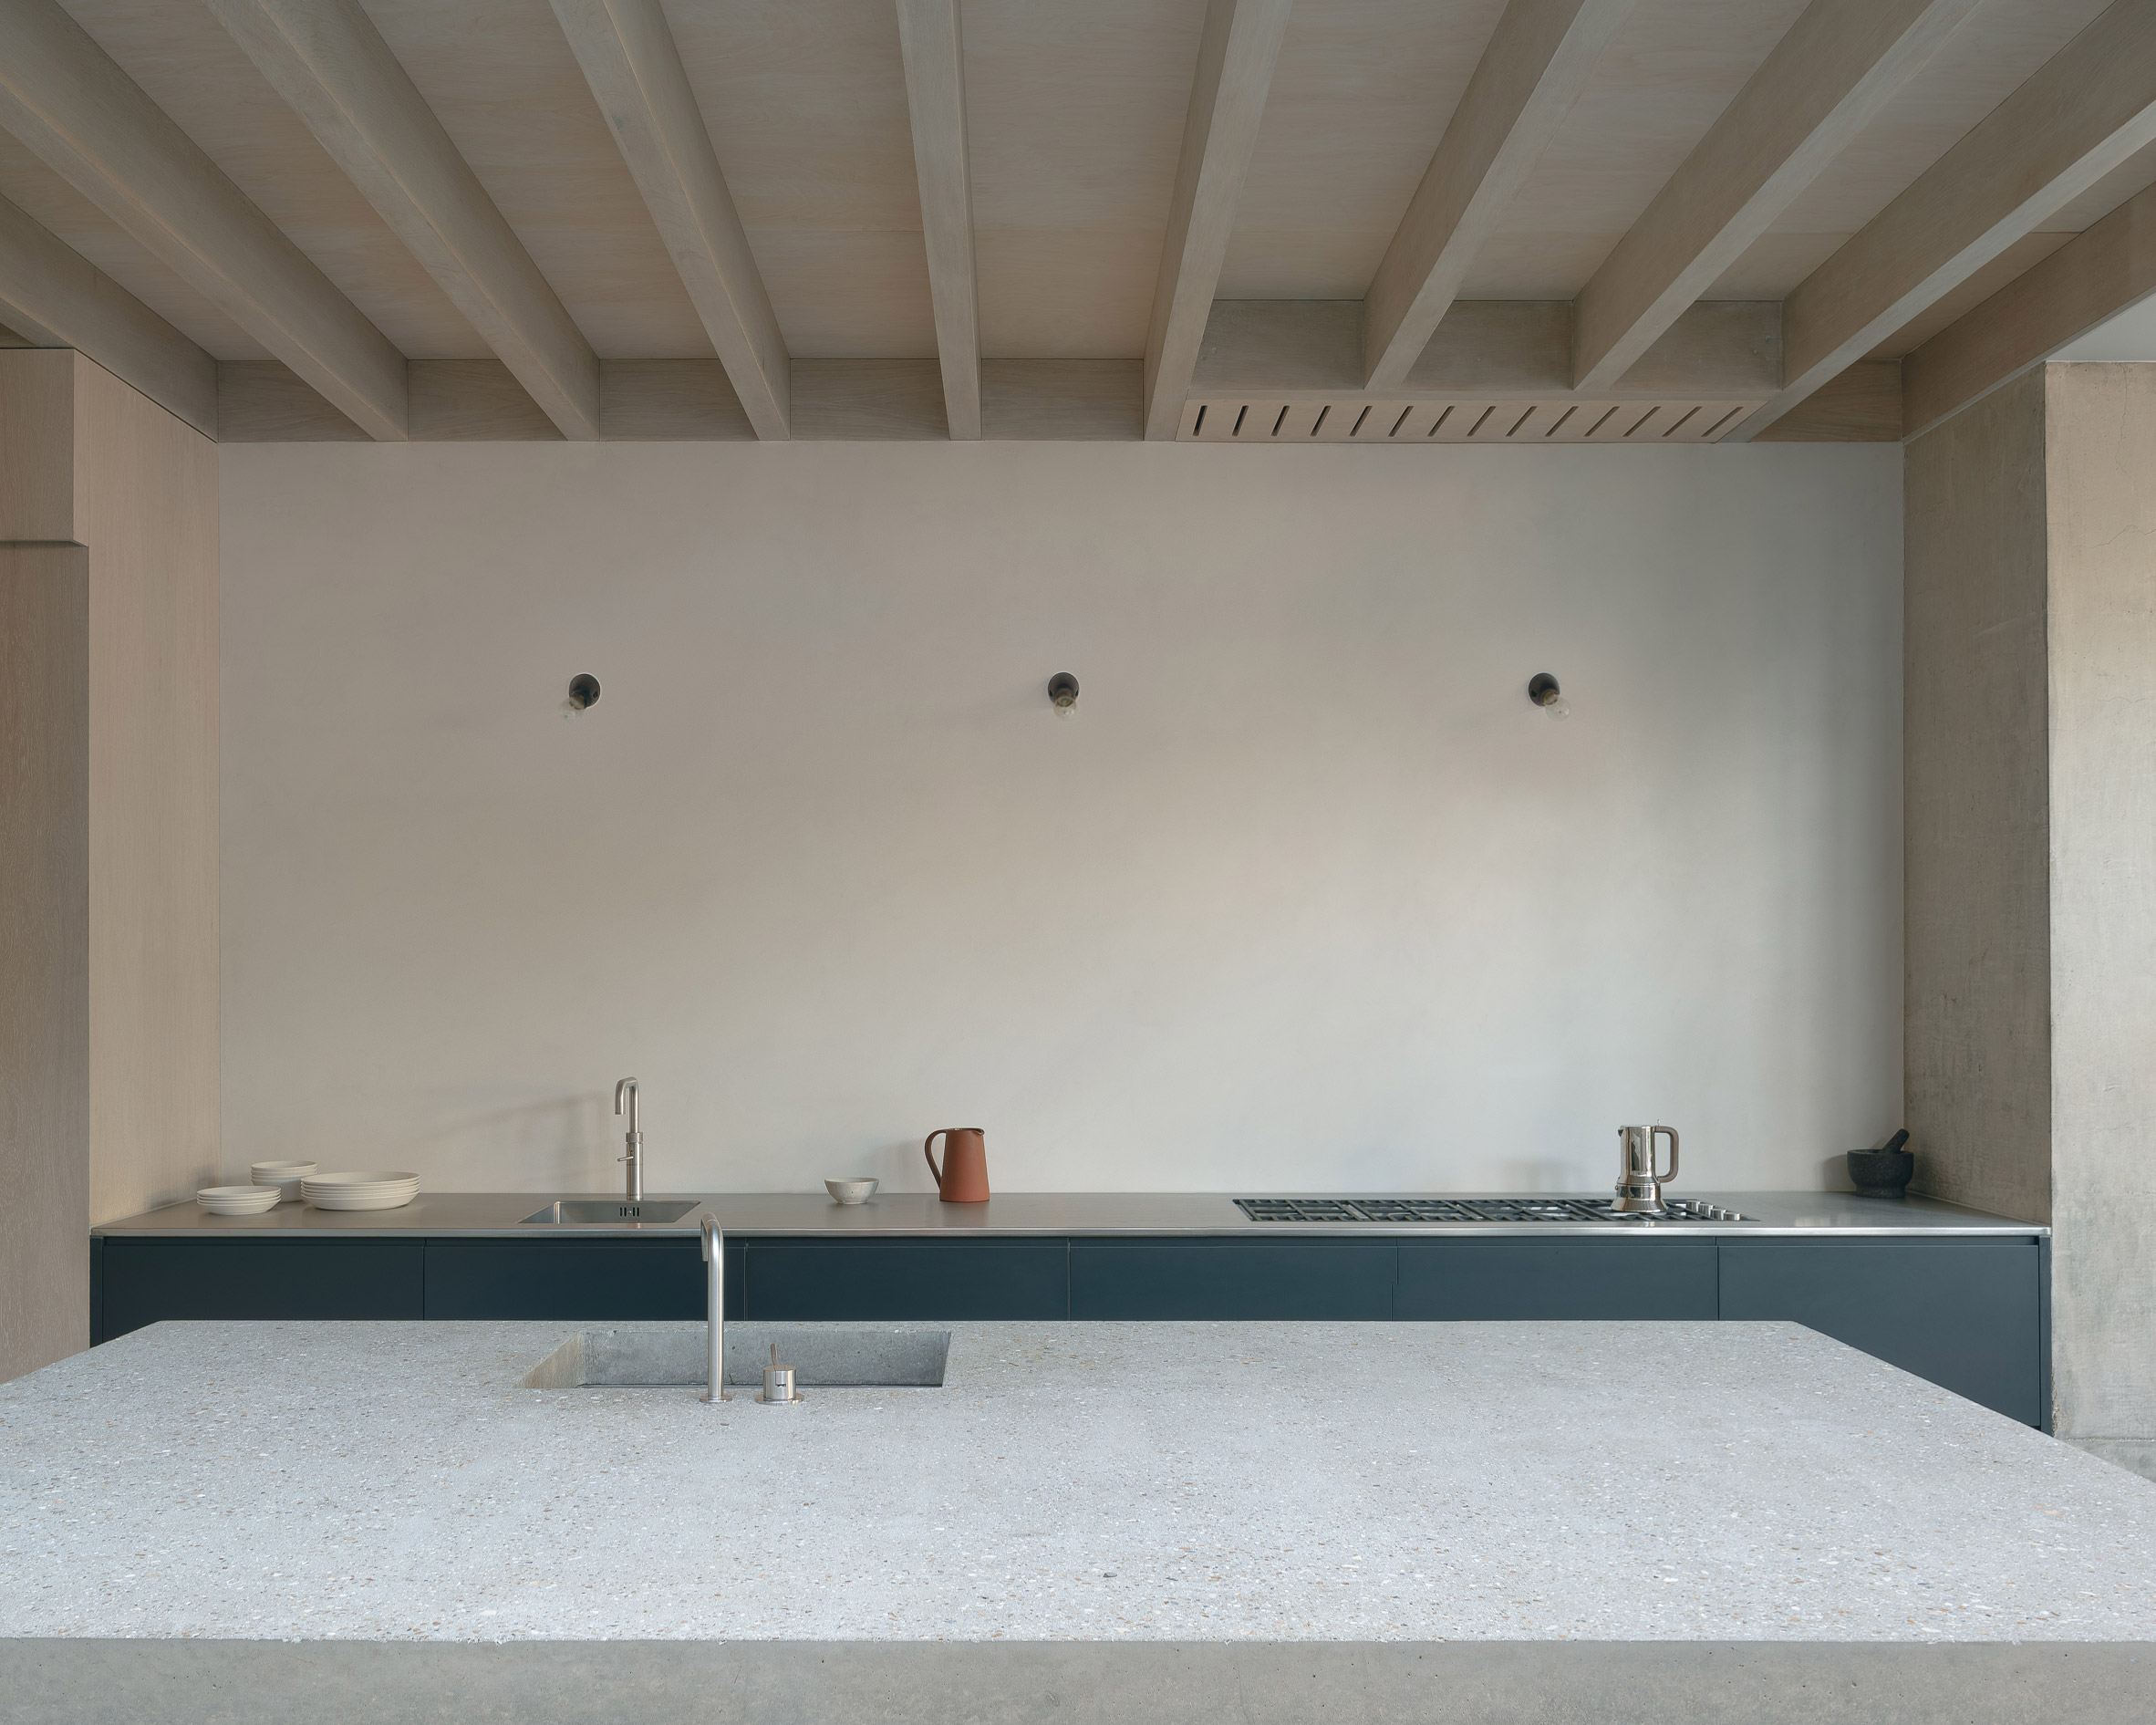 The kitchen island in Concrete Plinth House has a stone counter top 